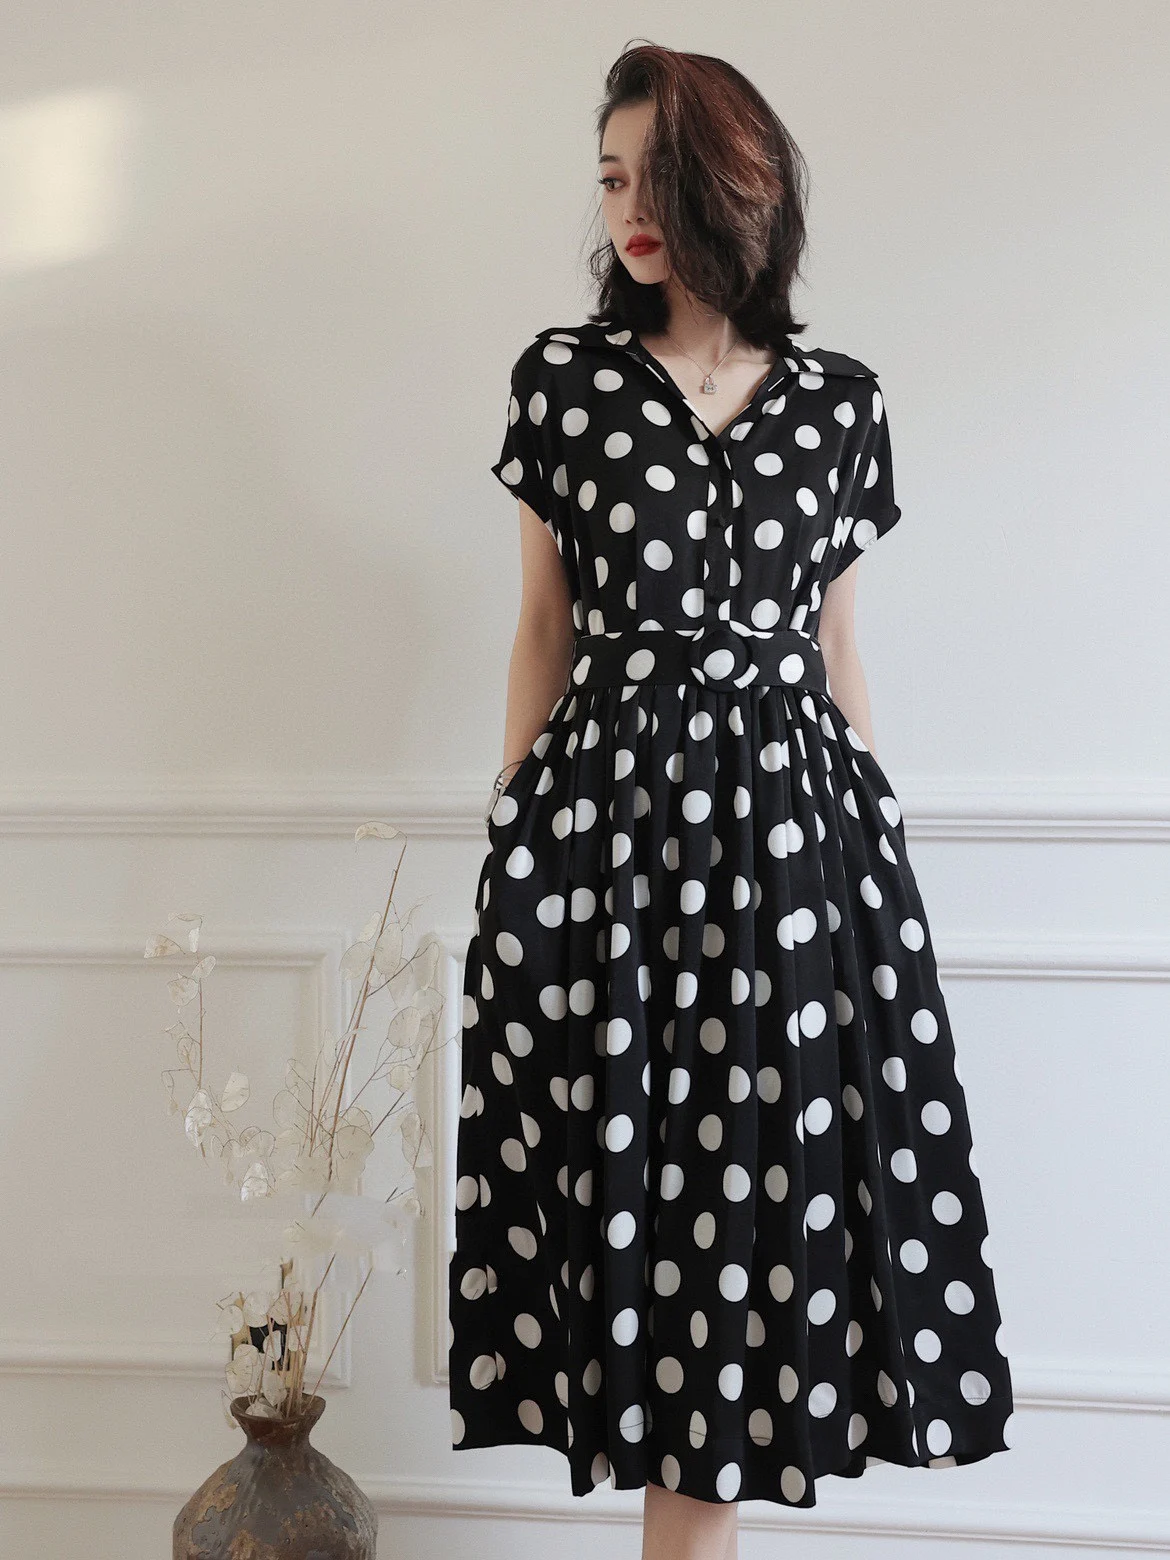 2023 spring and summer women's clothing fashion new Polka dot dress0609